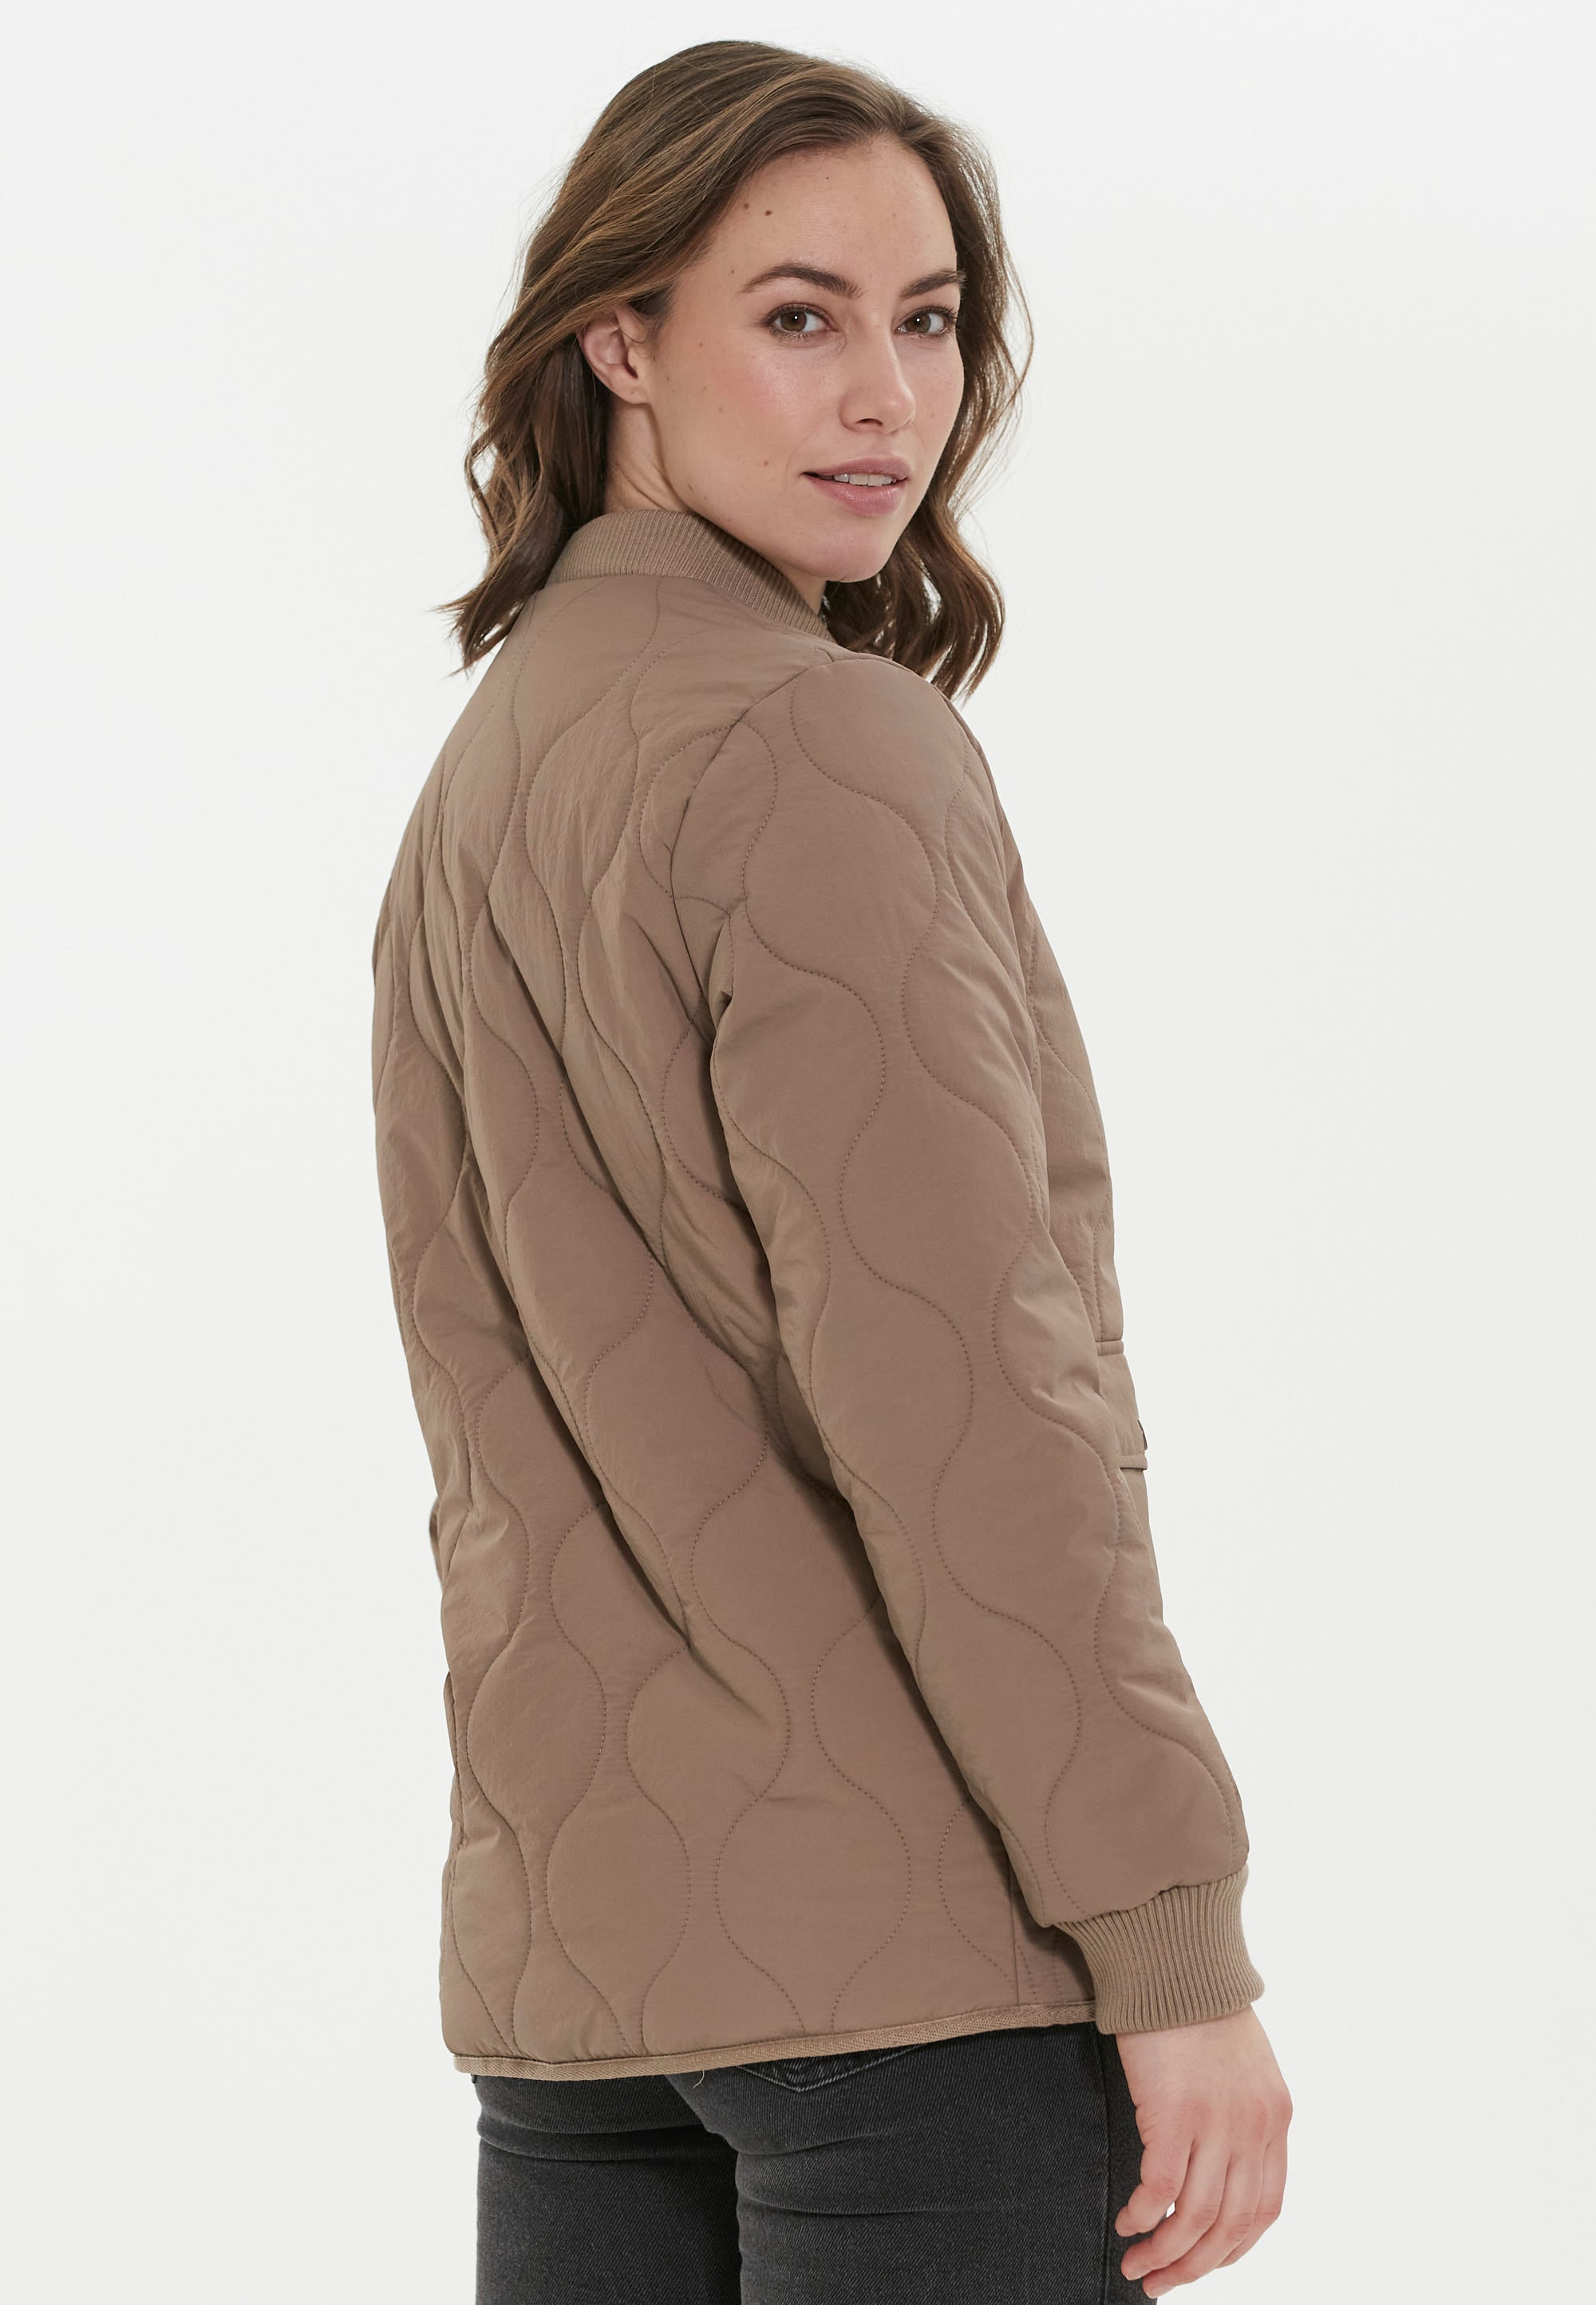 WEATHER REPORT Steppjacke »Eilish«, in tollem Steppdesign